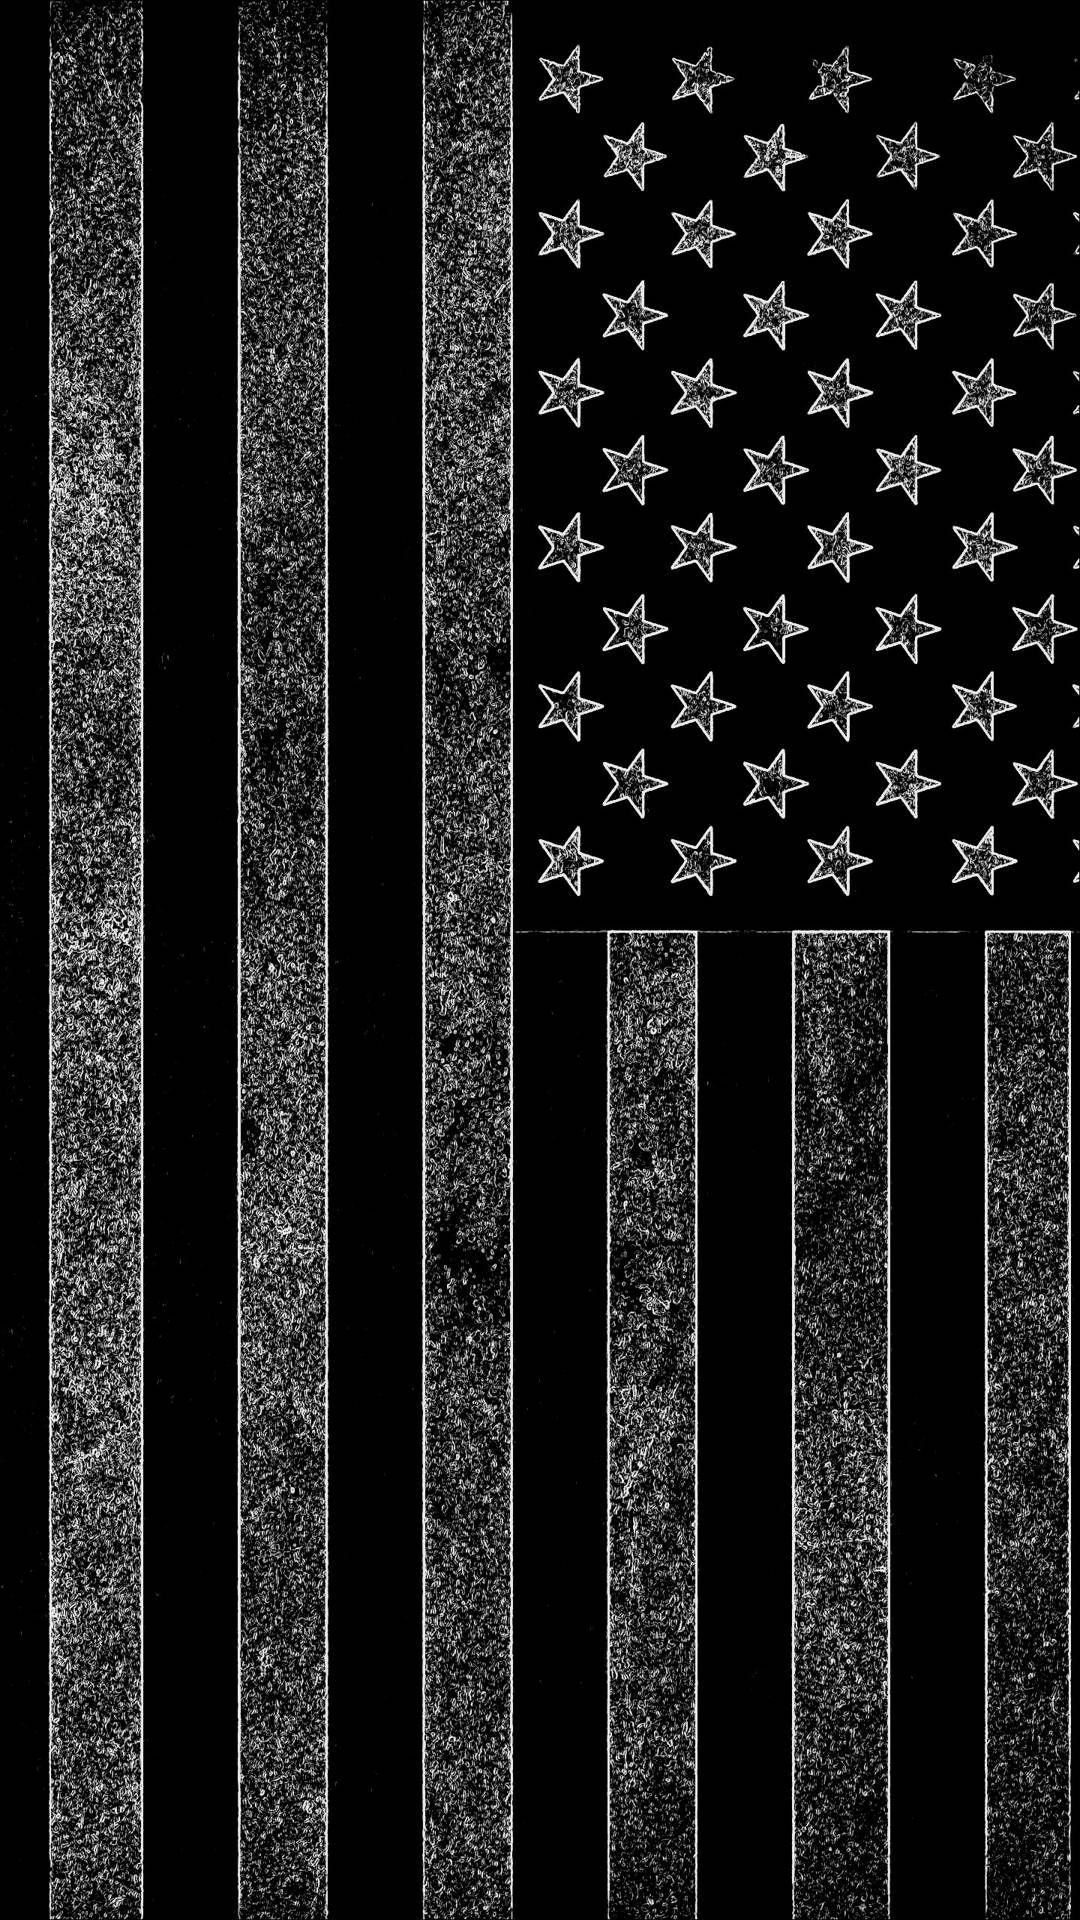 Wallpaper Thin Red Line Flag Wallpapers